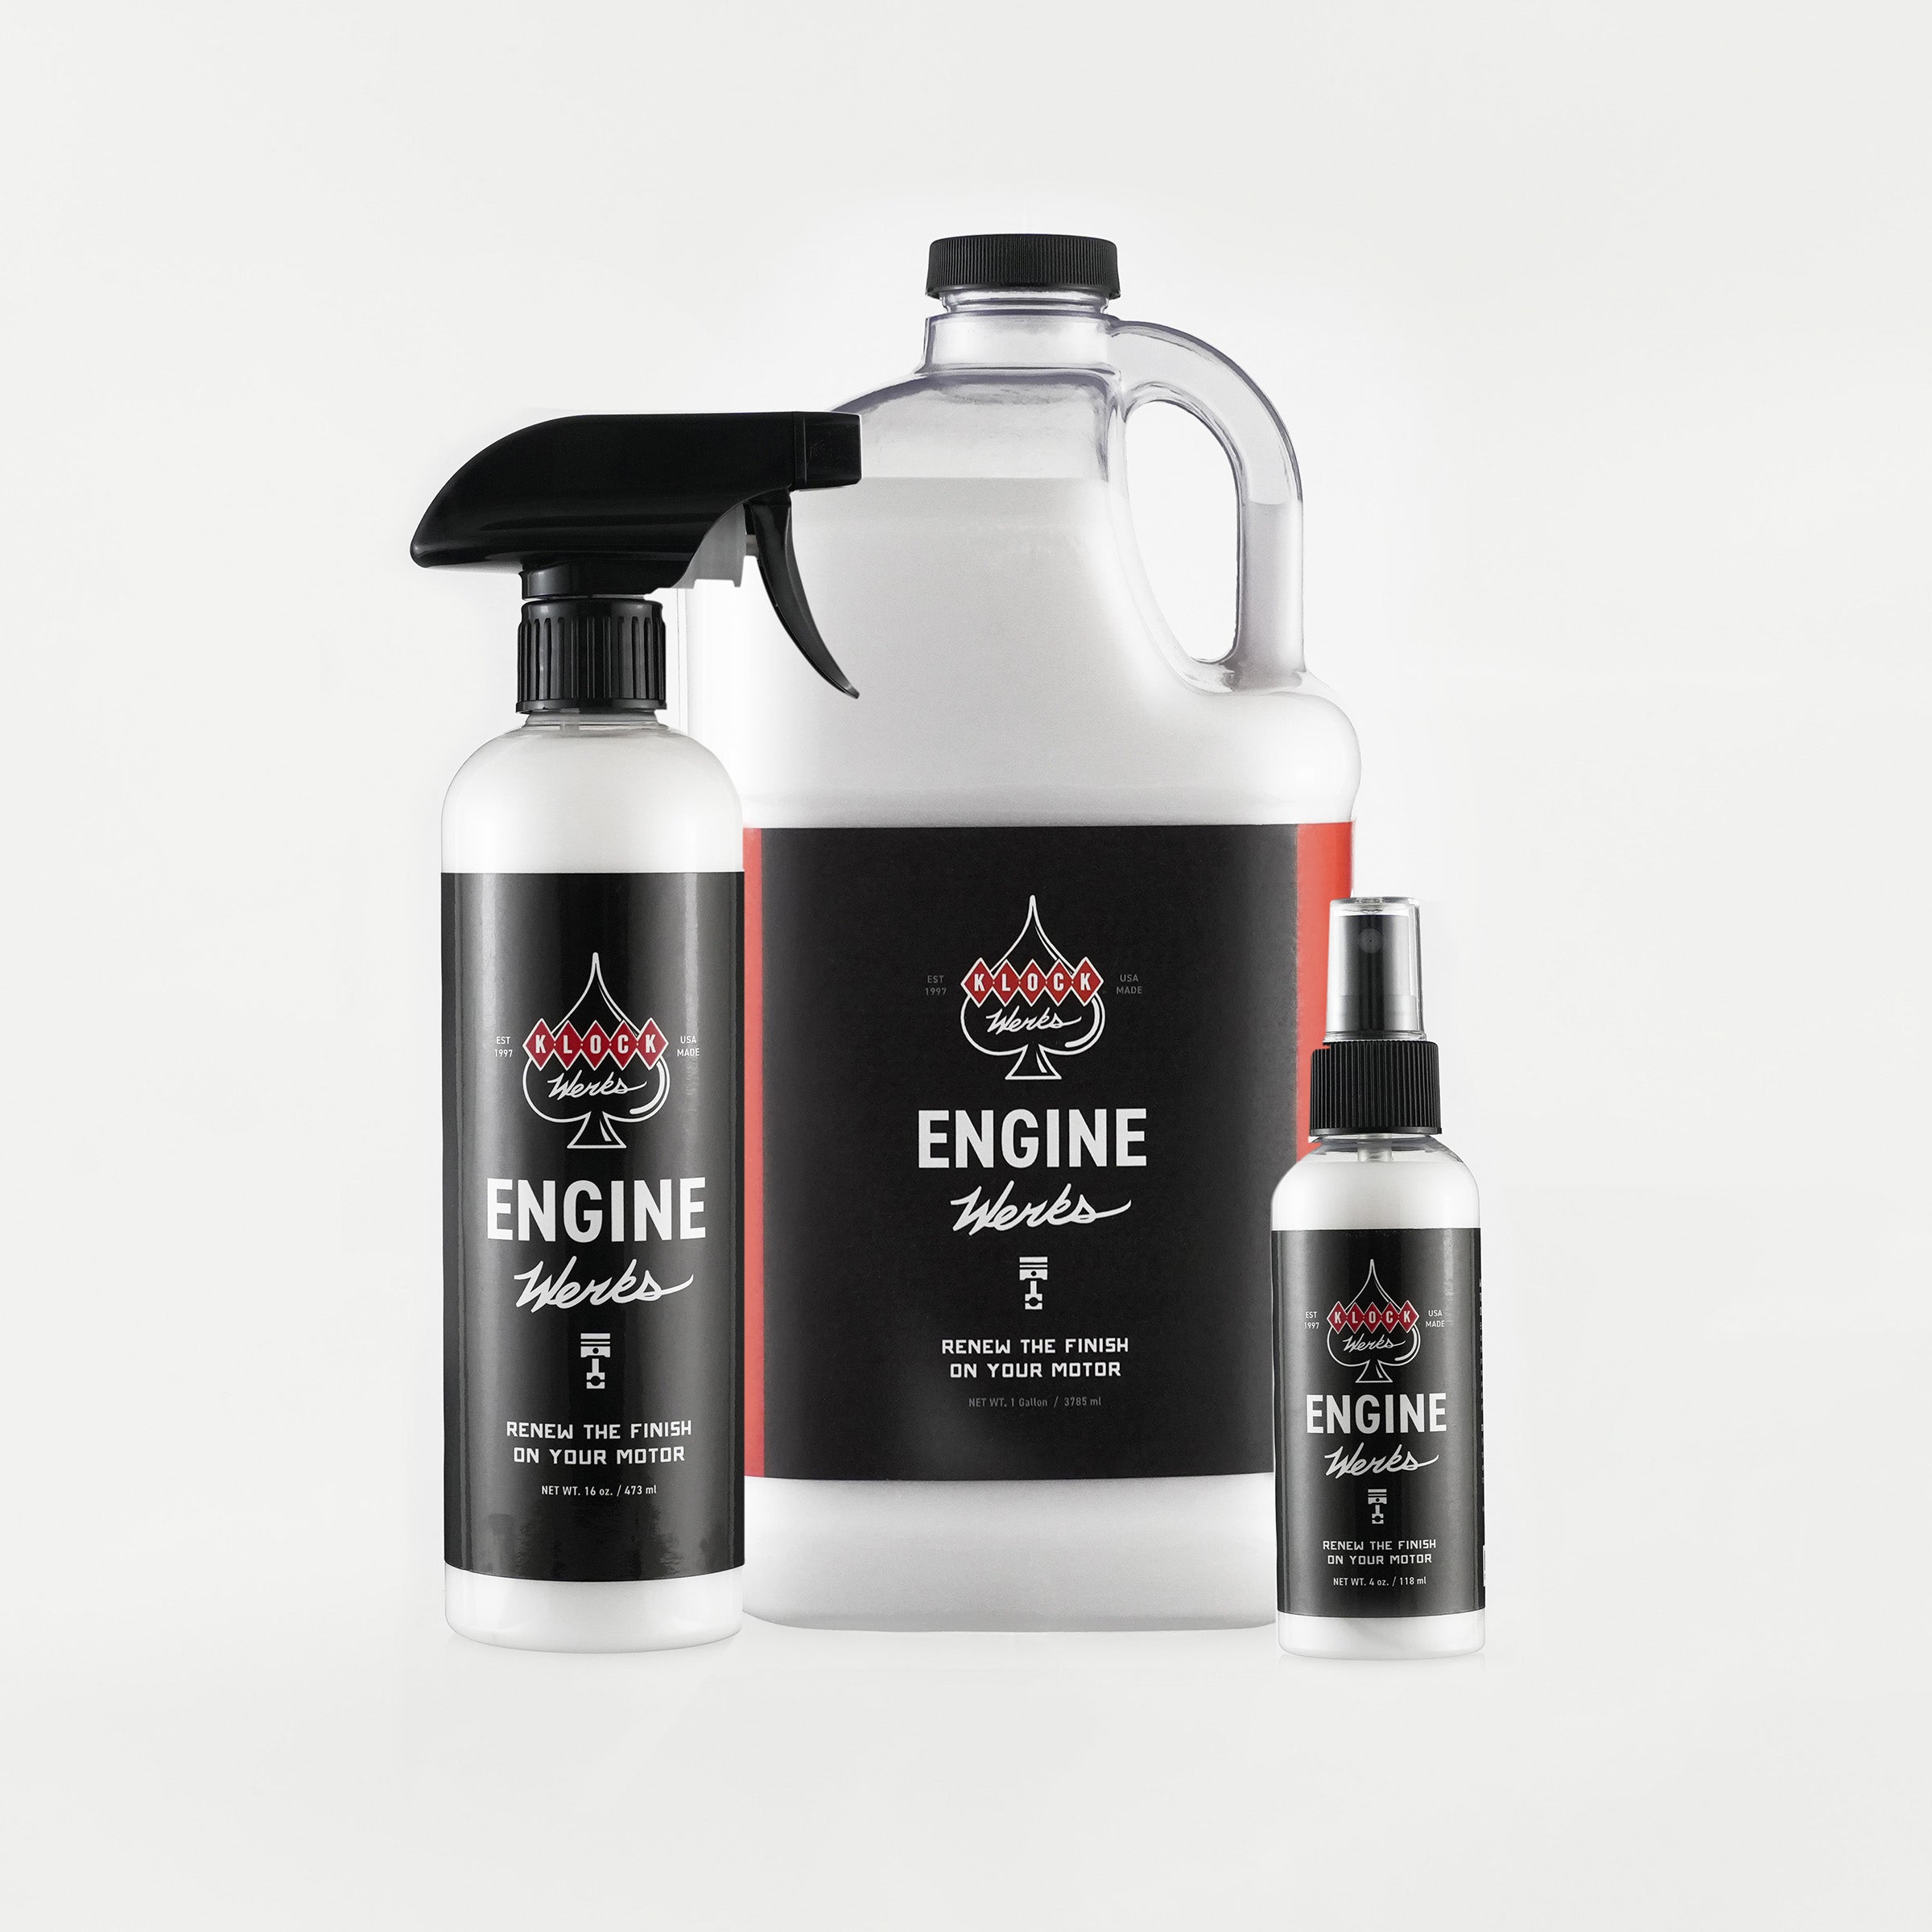 Engine Werks cleaning products complete lineup(The Complete Engine Werks Lineup)